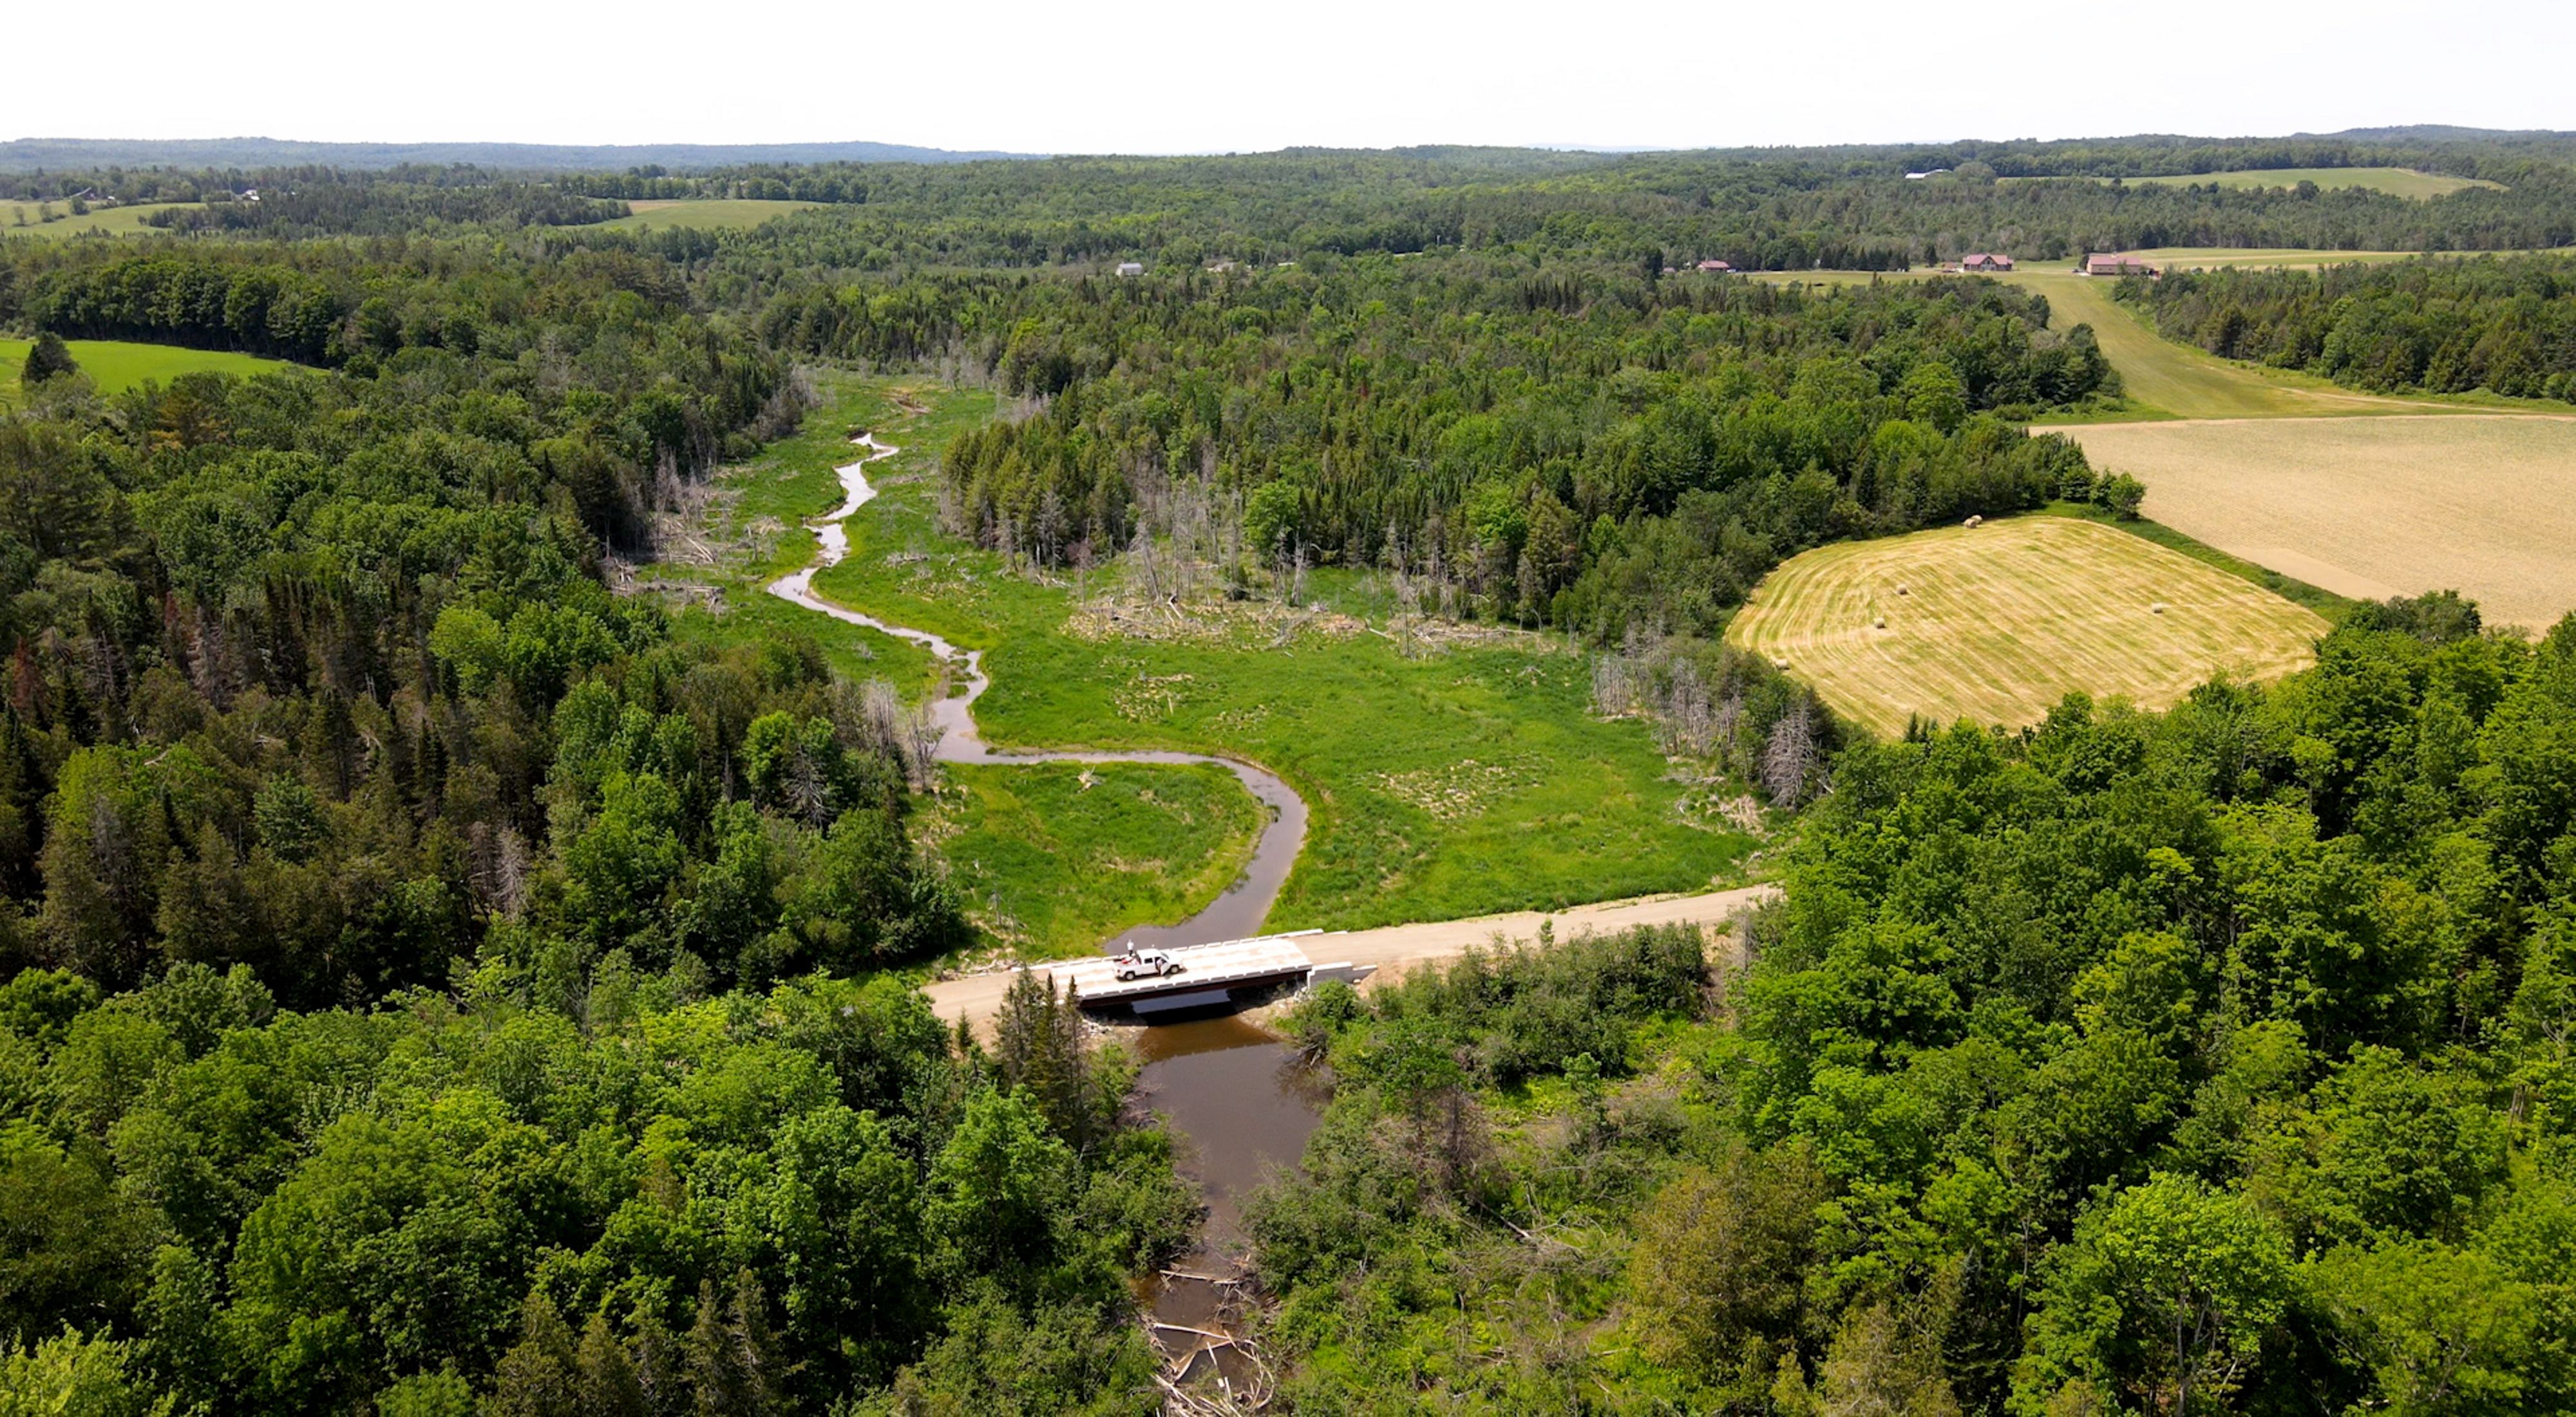 Aerial view of a truck parked on a bridge over a stream.